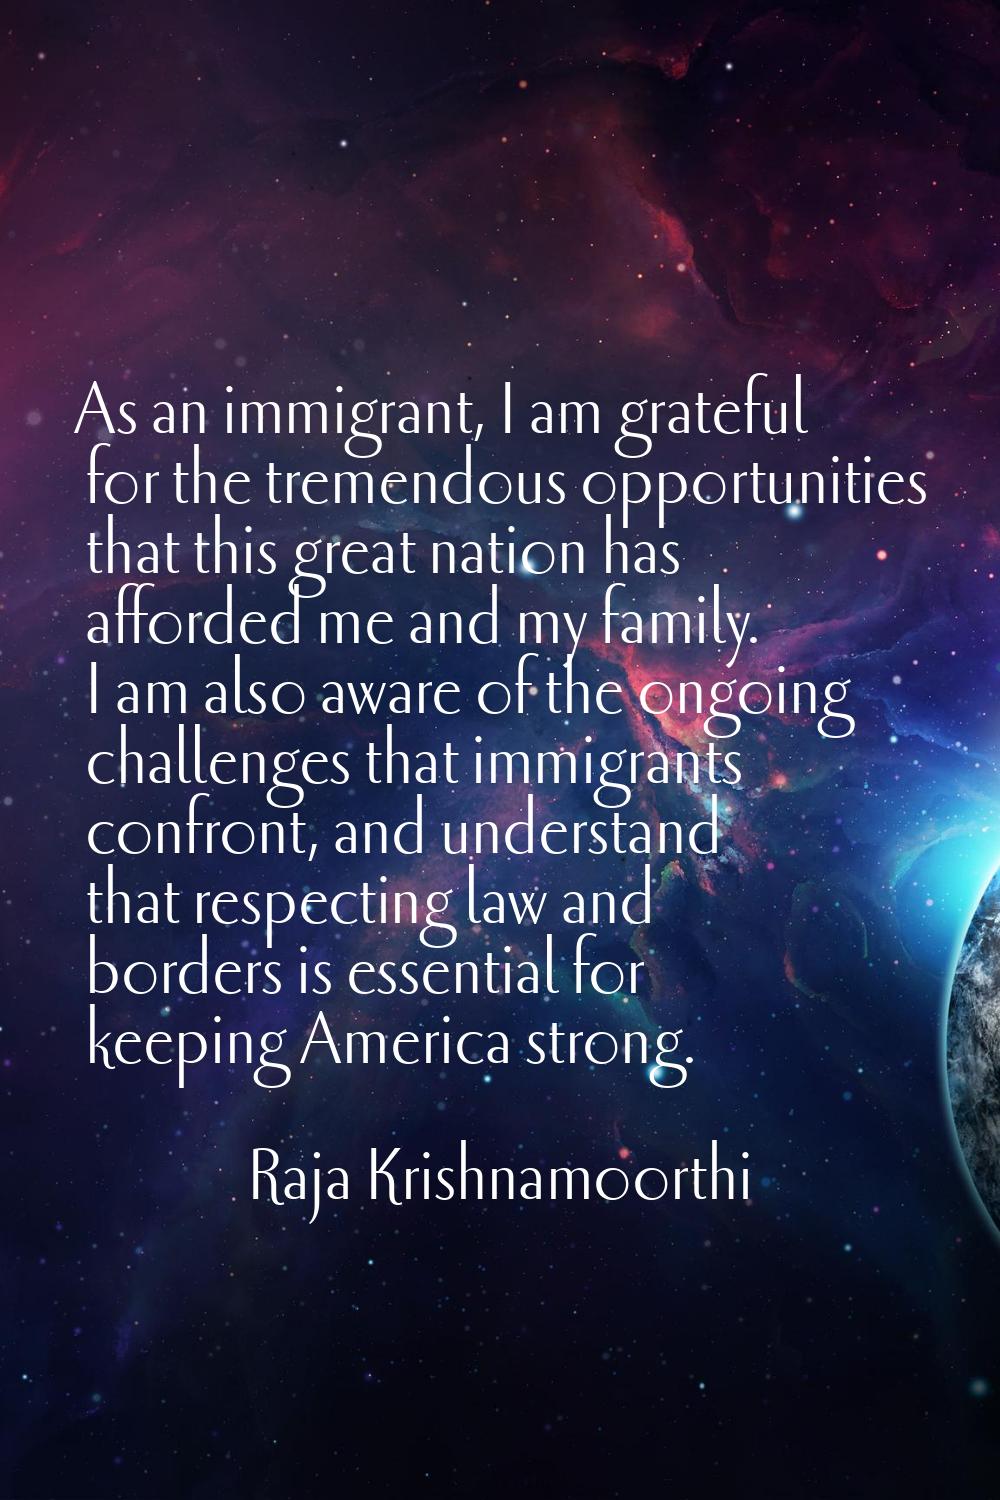 As an immigrant, I am grateful for the tremendous opportunities that this great nation has afforded